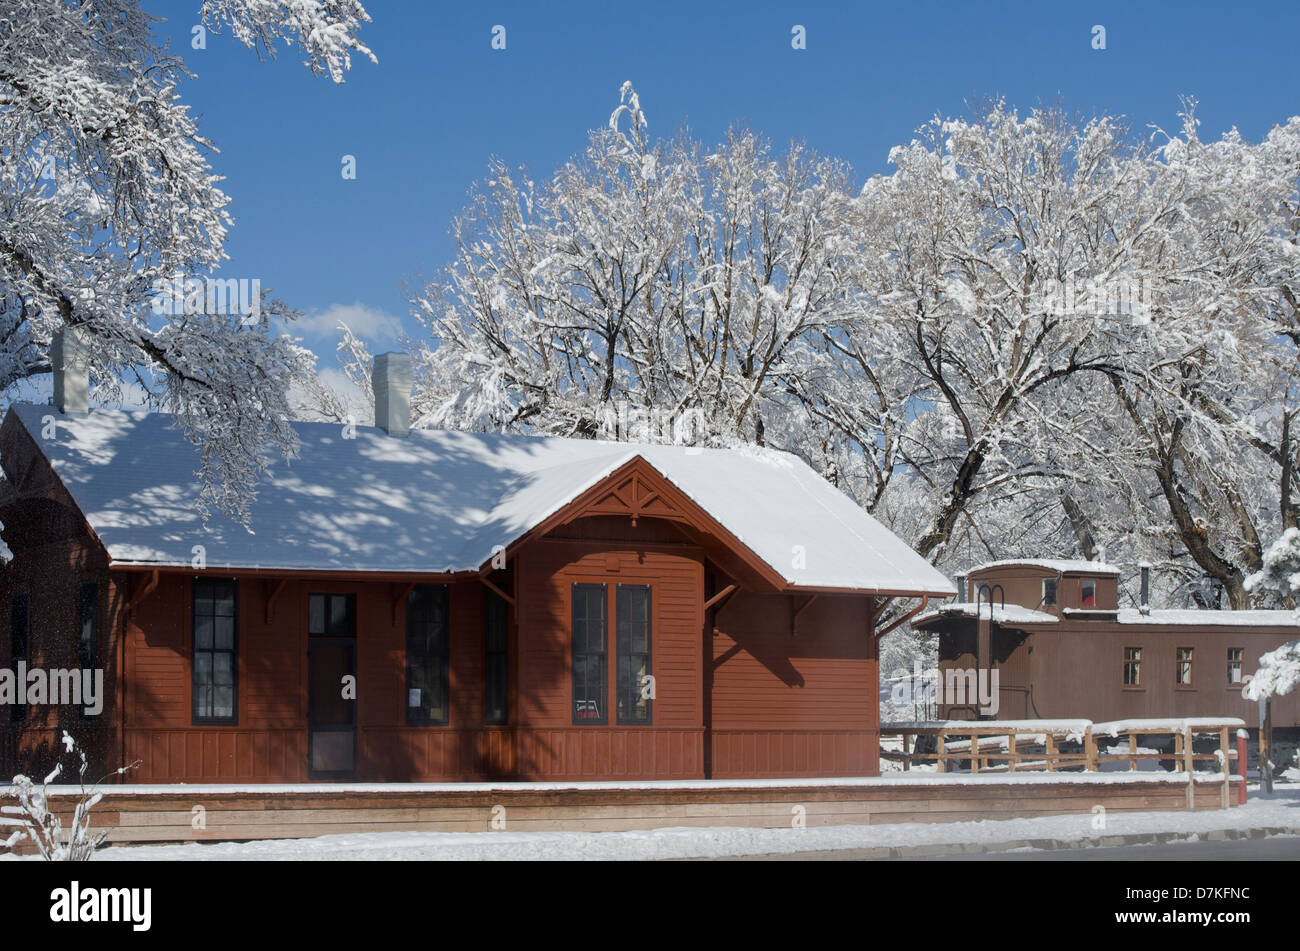 The old Colorado Midland Railroad Depot in Buena Vista, Colorado has been renovated, along with the caboose. Stock Photo